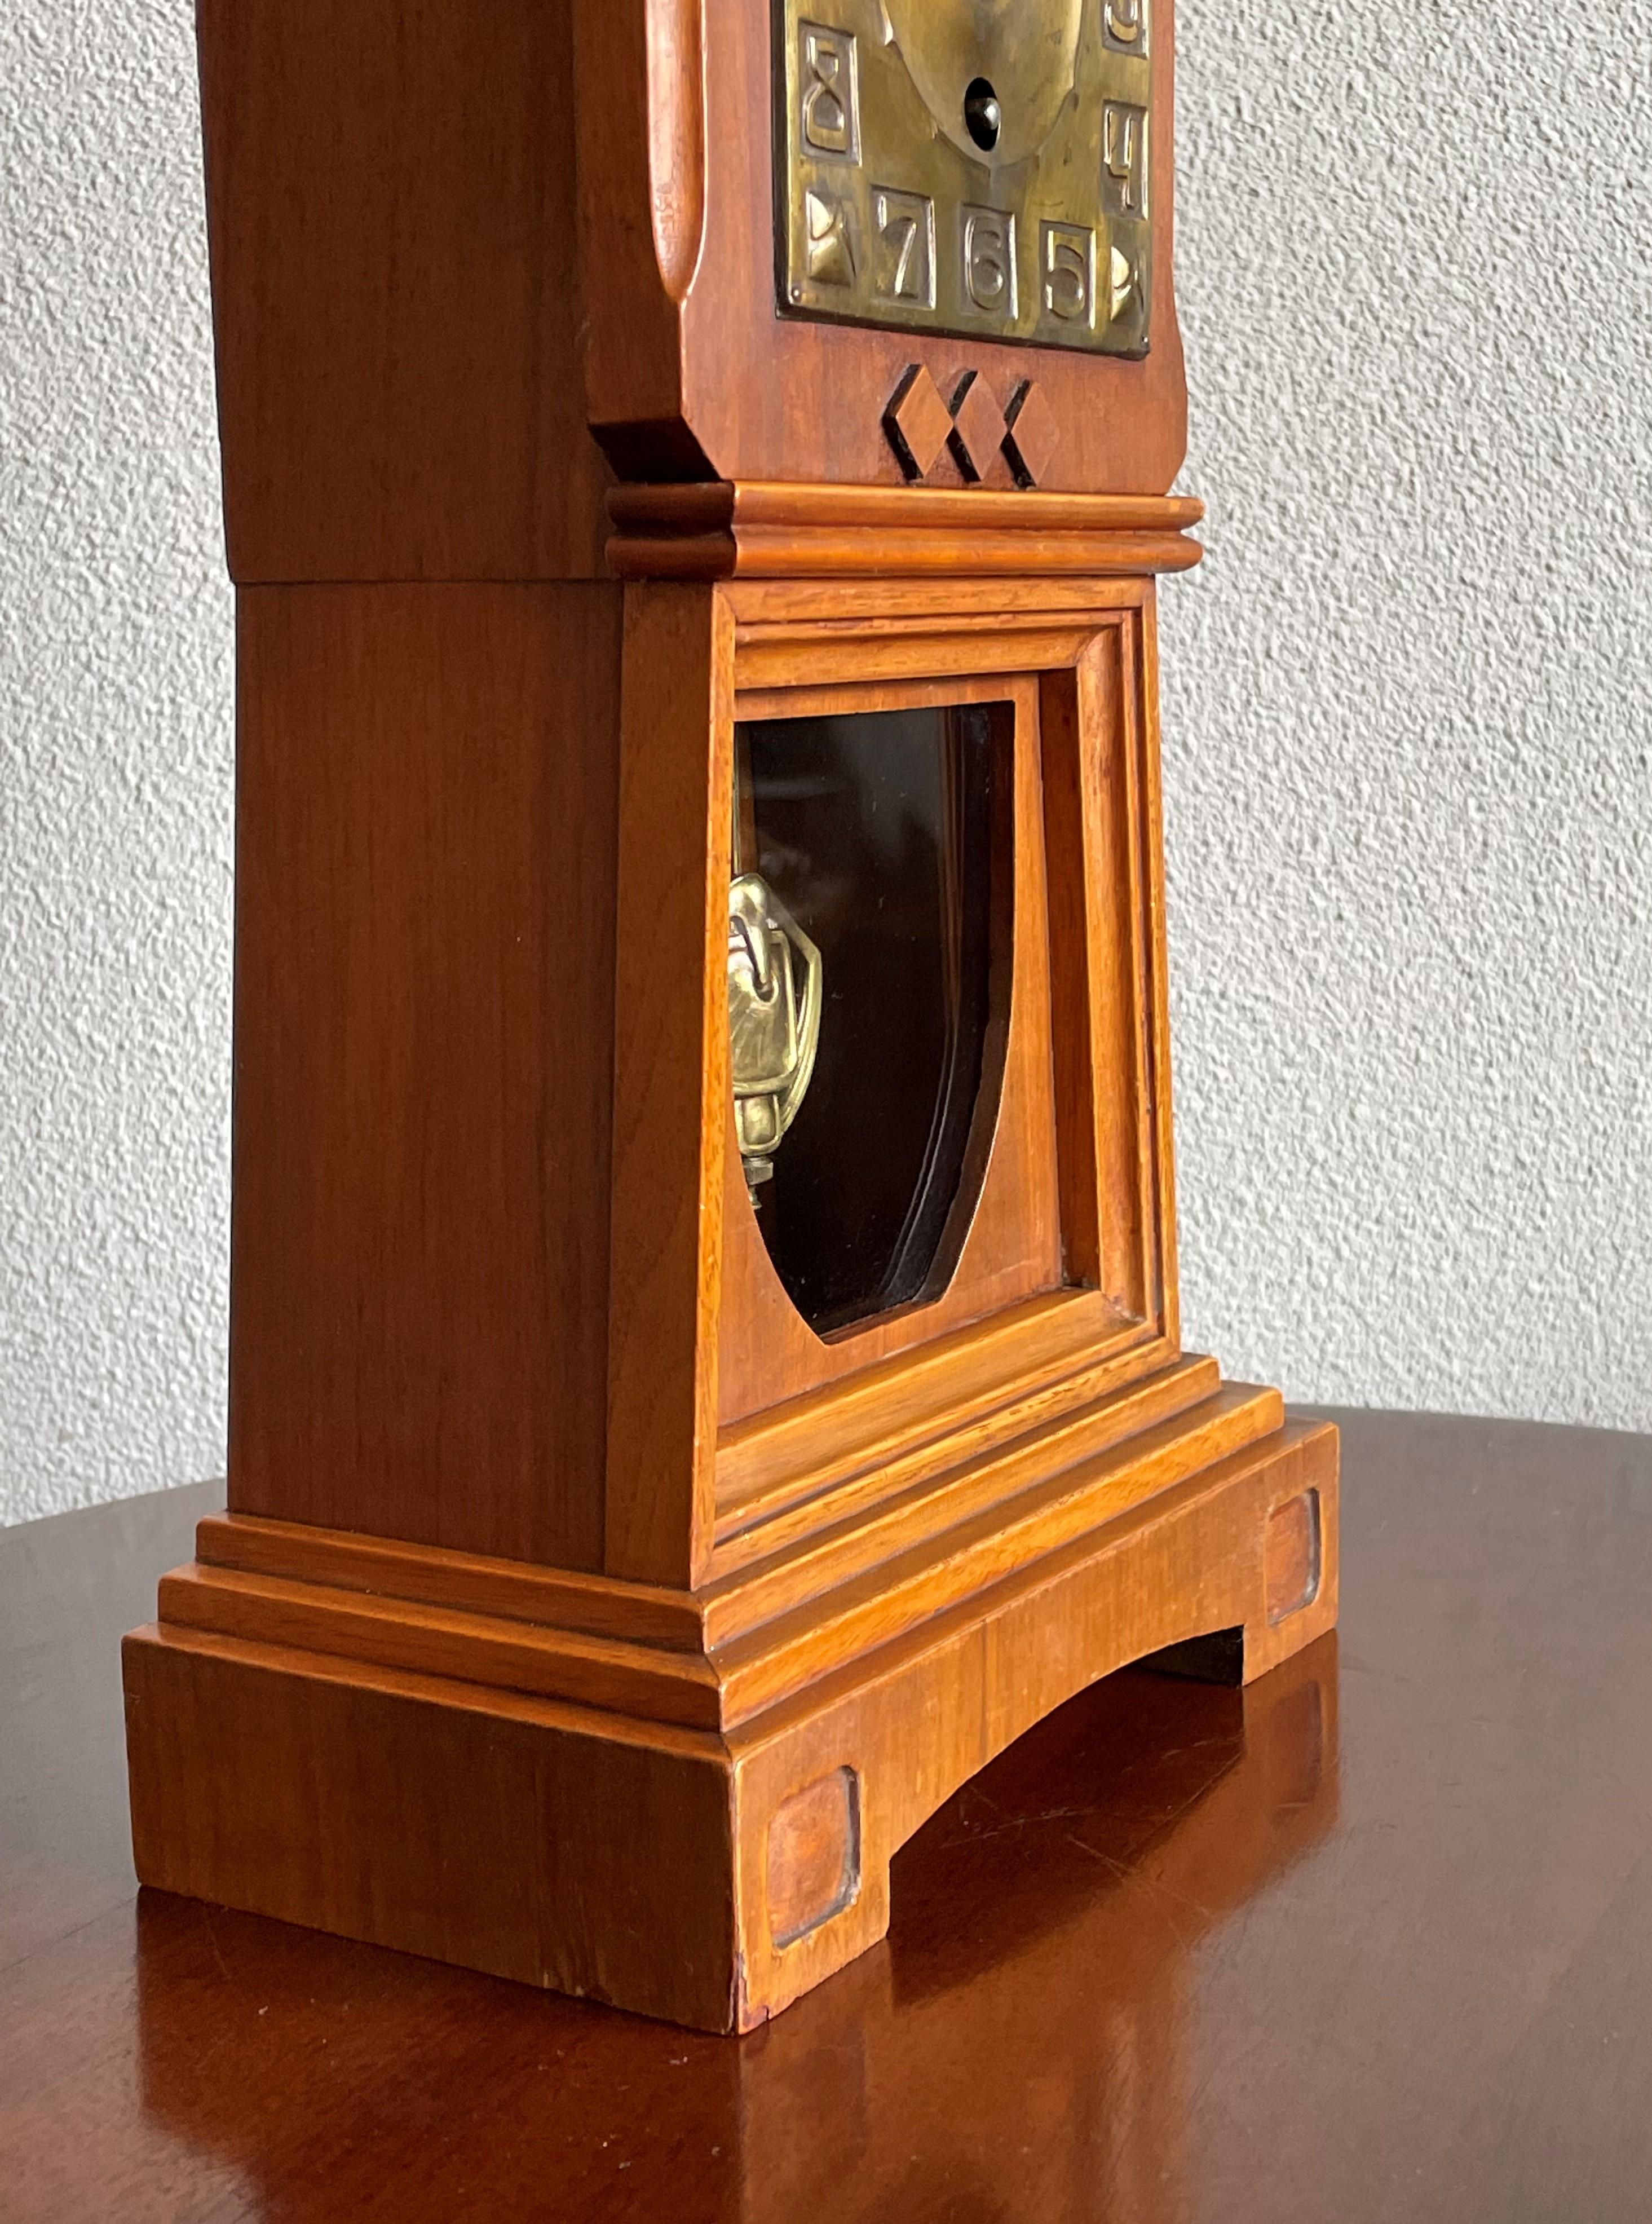 Blackened Arts and Crafts Nutwood Mantel or Table Clock with an Embossed Brass Dial Face For Sale